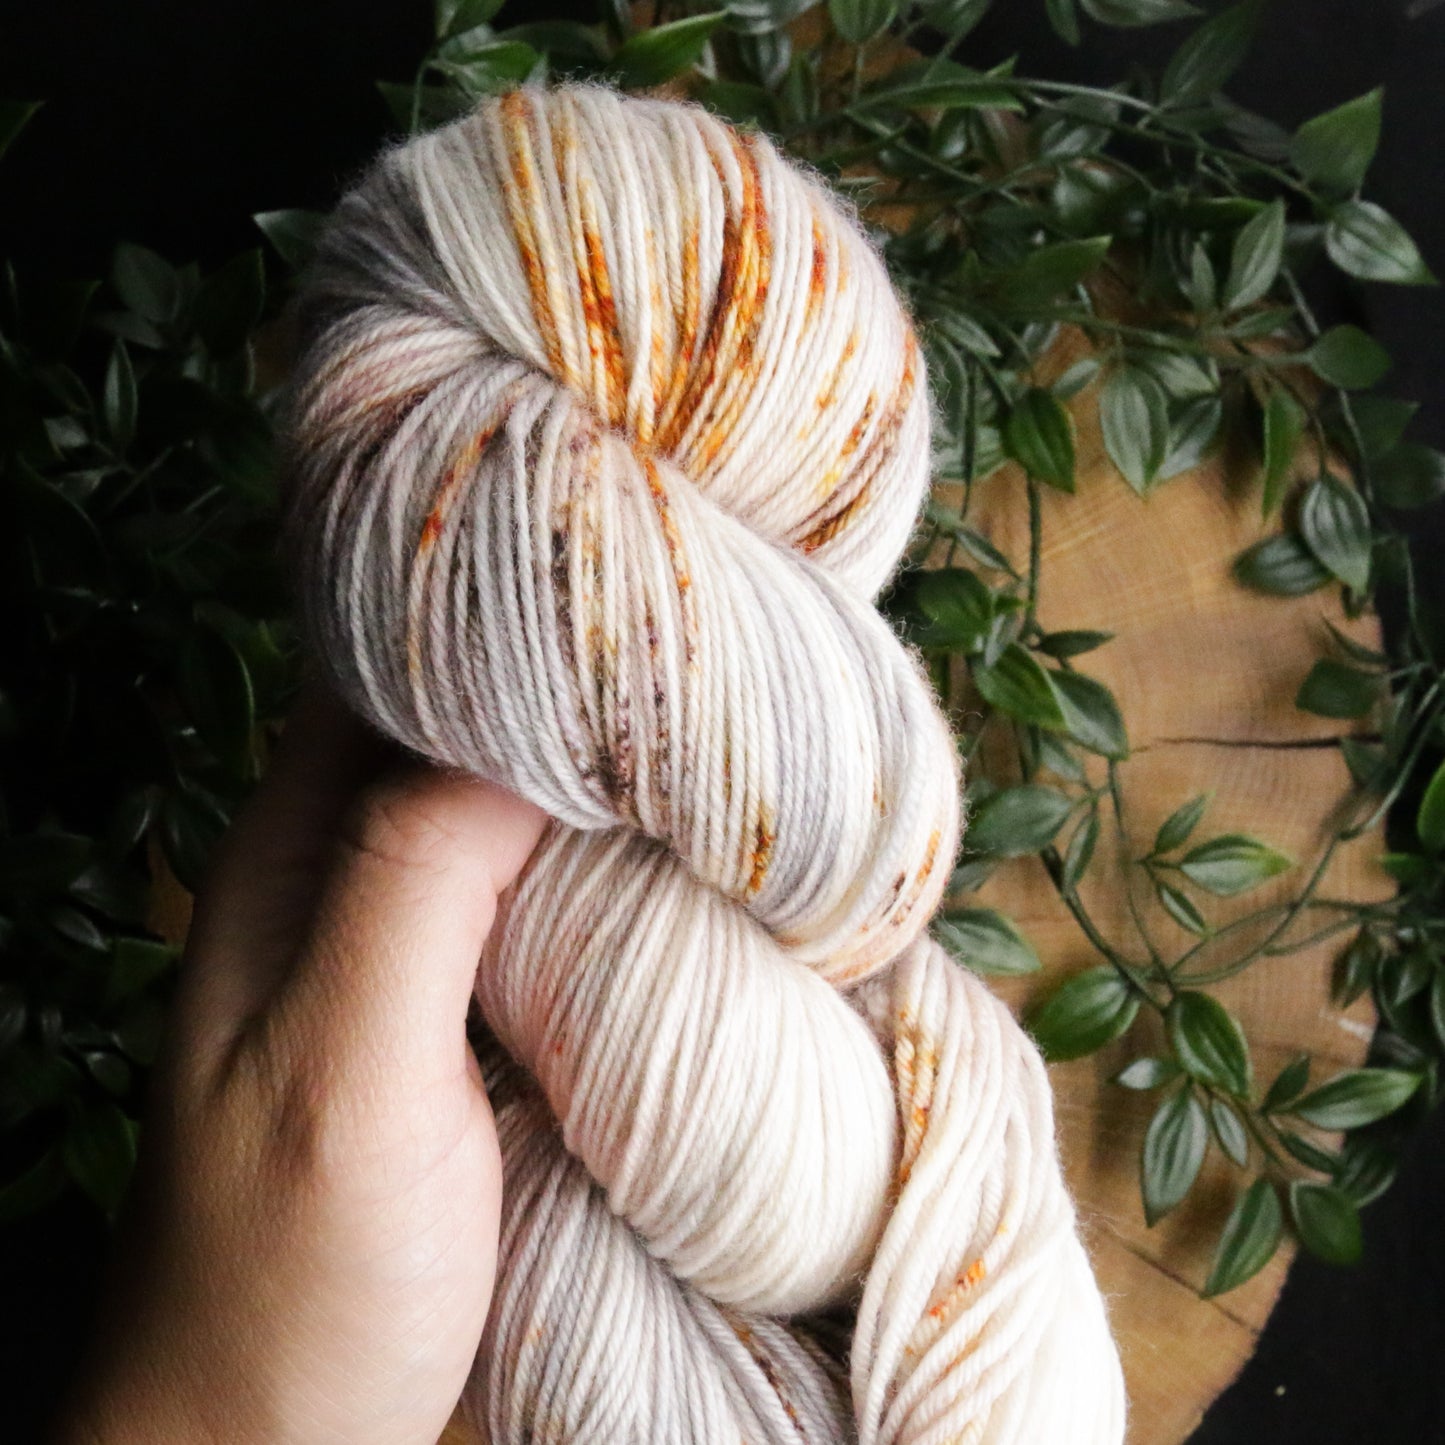 One of a Kind - Merino Squish - Fingering